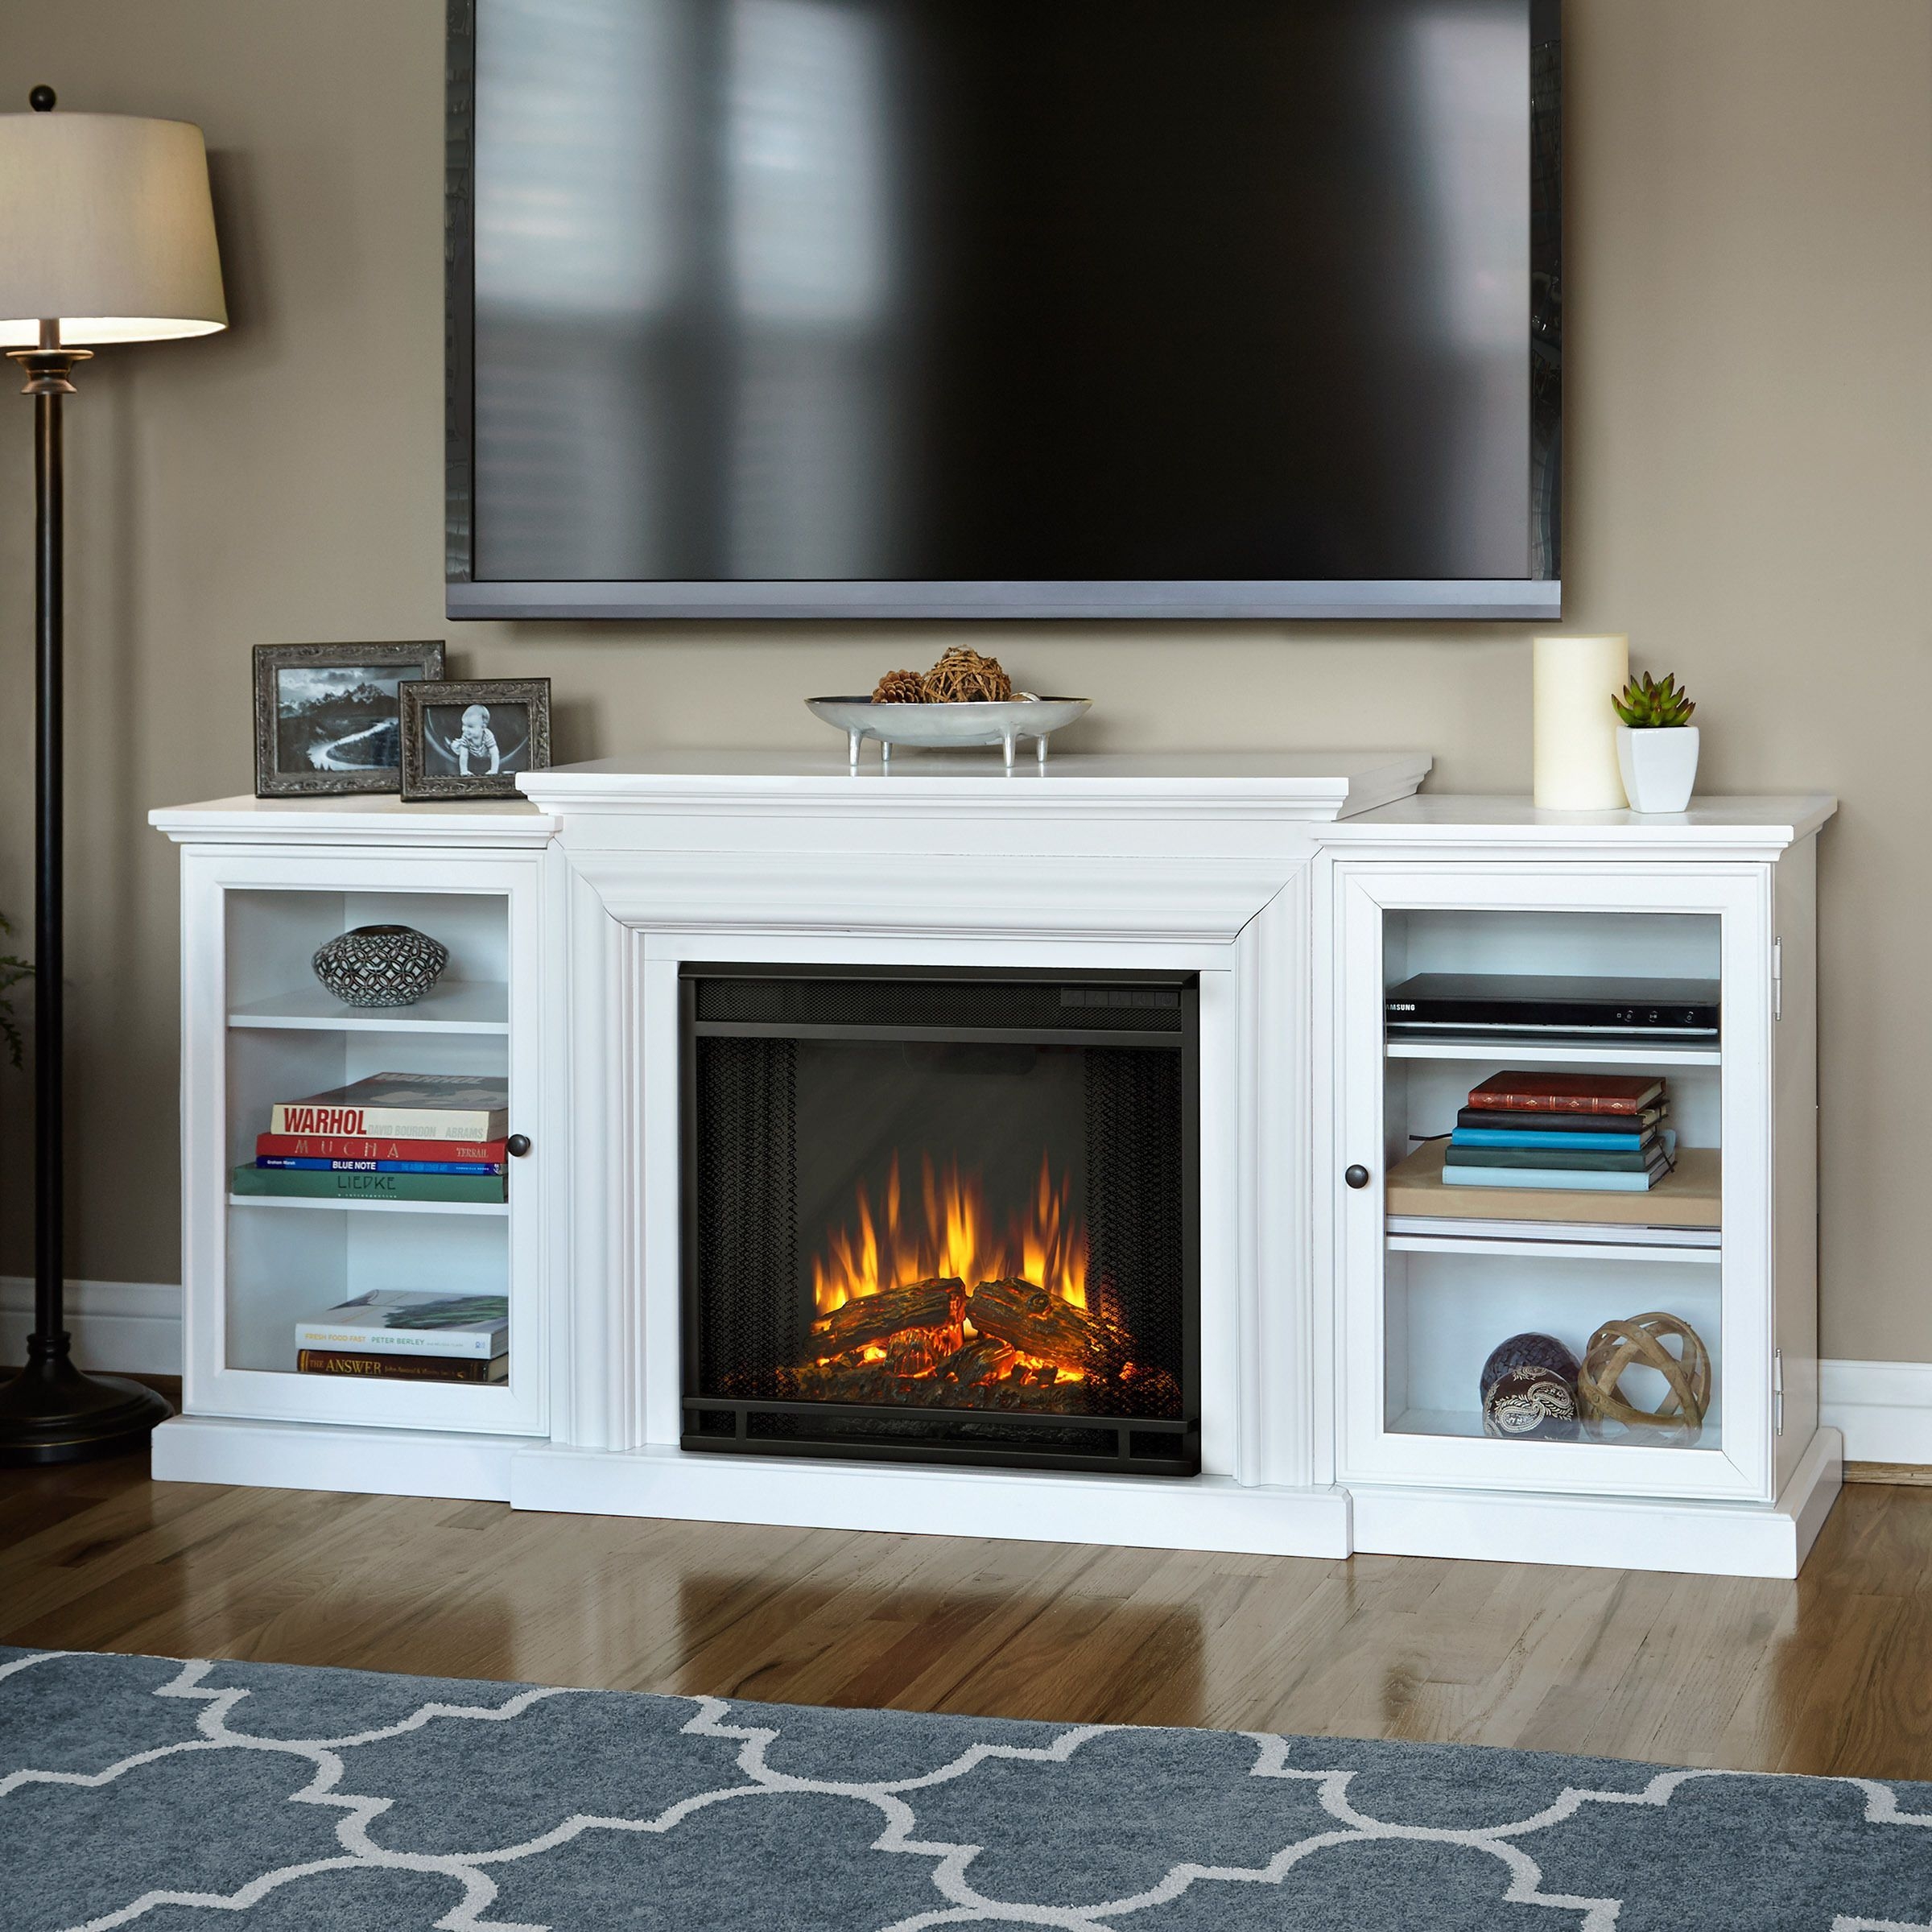 Frederick TV Stand for TVs up to 78" with Fireplace Included